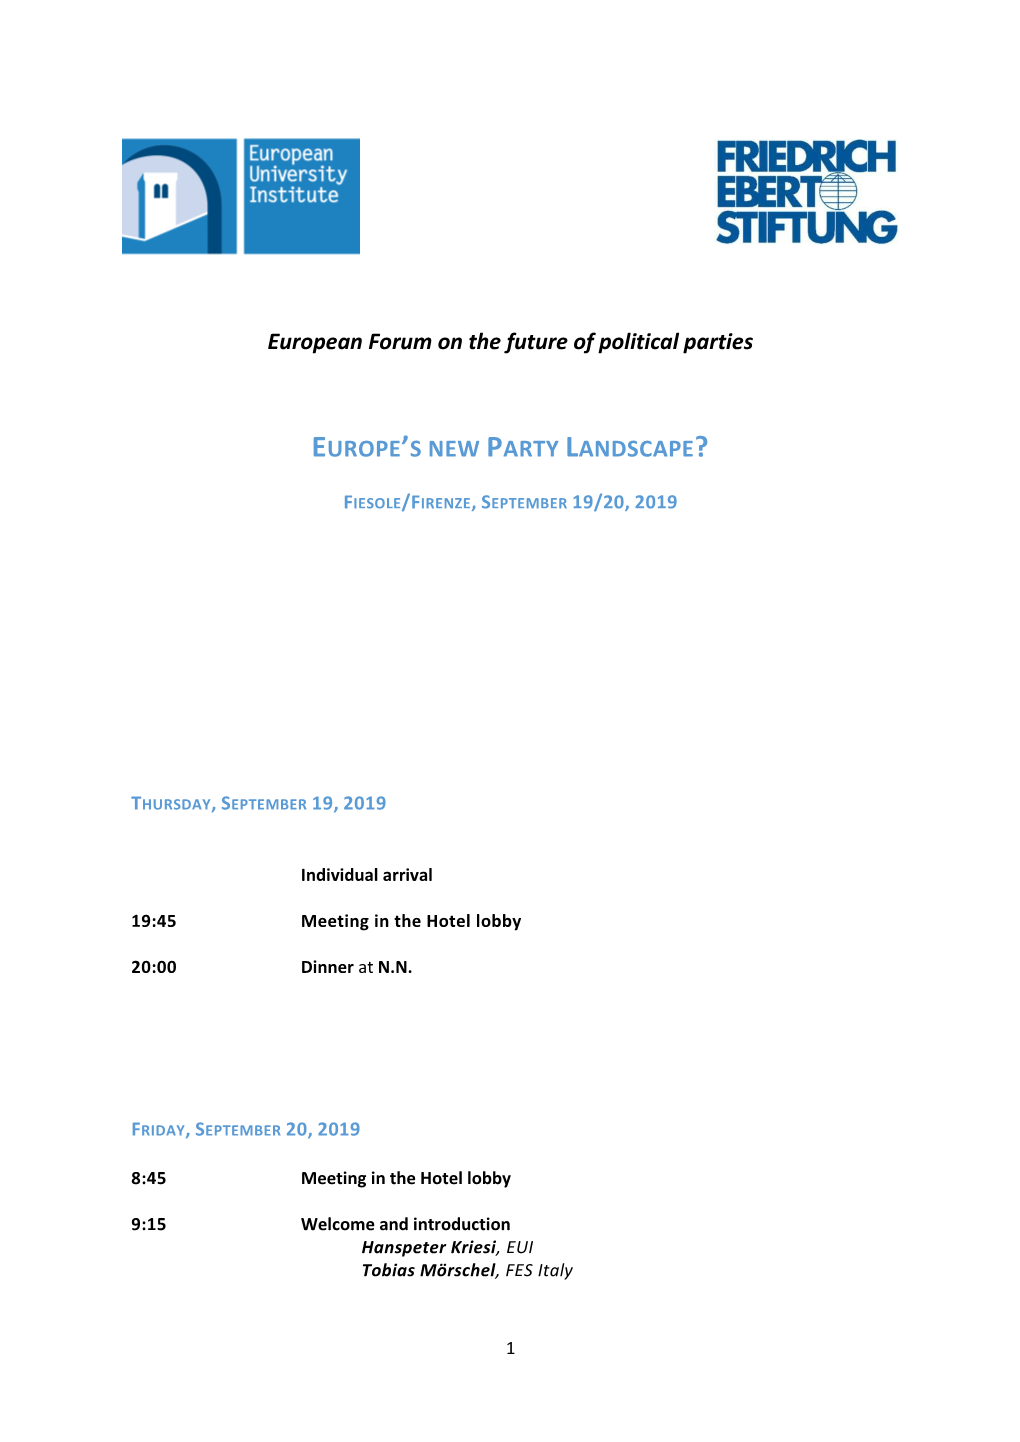 European Forum on the Future of Political Parties EUROPE's NEW